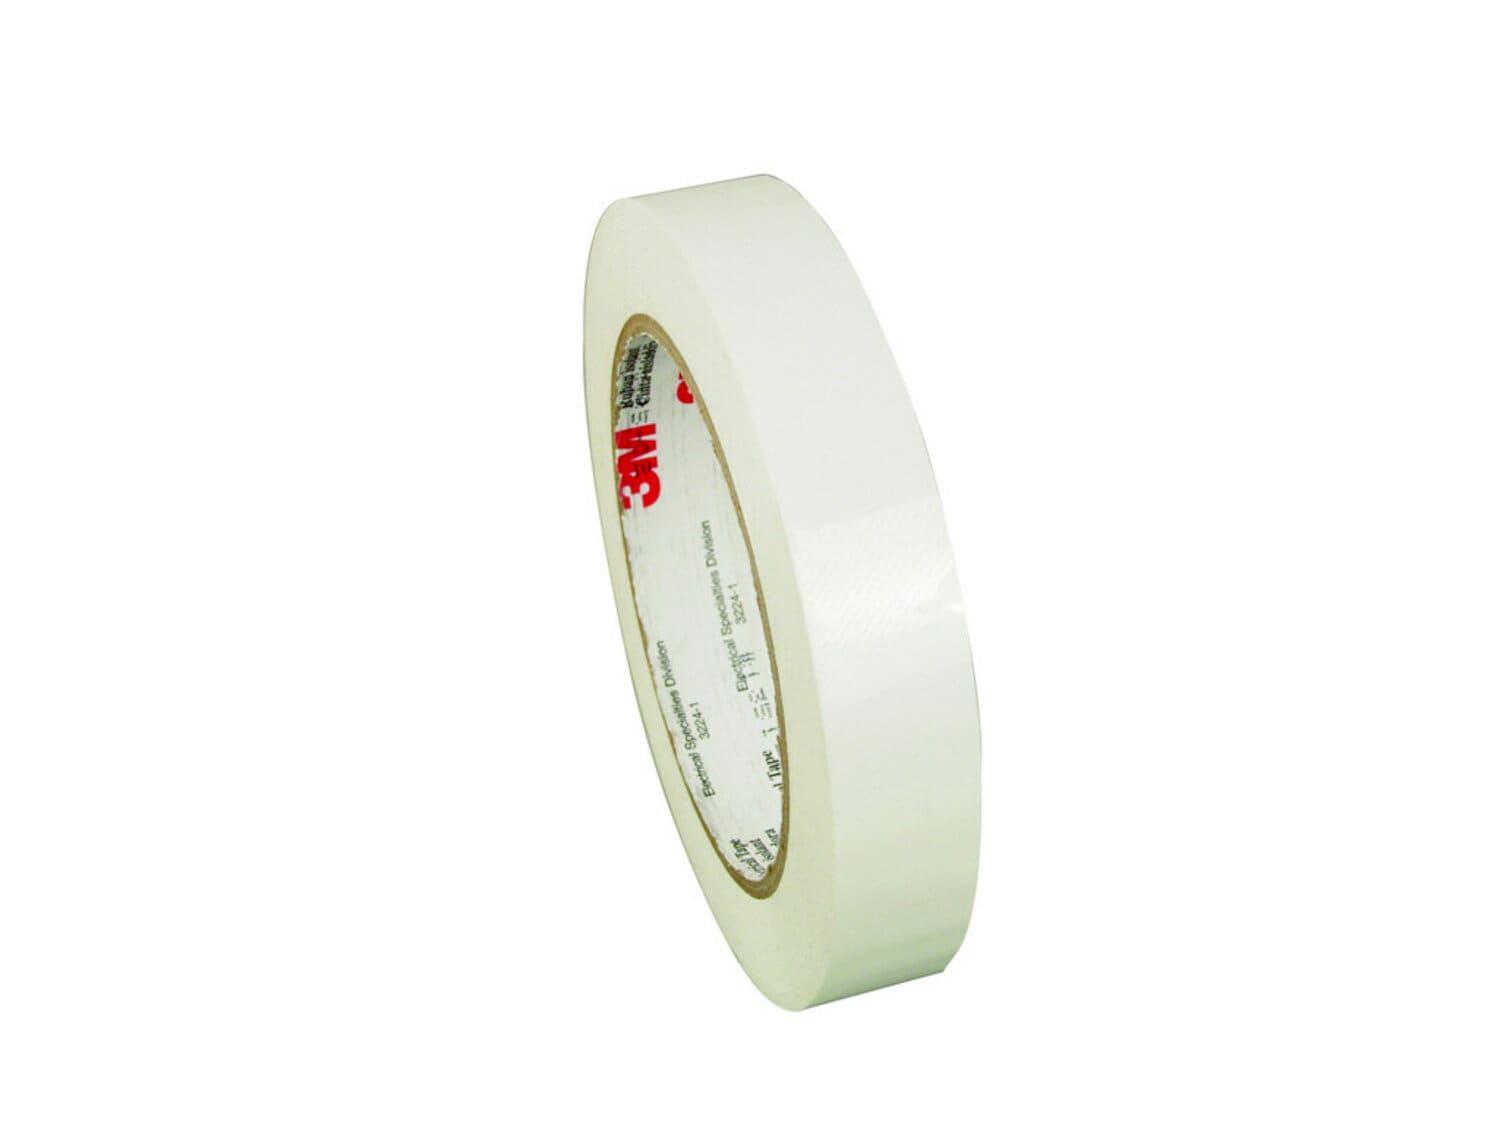 7010319339 - 3M Polyester Film Electrical Tape 1350F-2, 50M, White, .687x144 yds,
3-in paper core, Log roll, 52 Rolls/Case